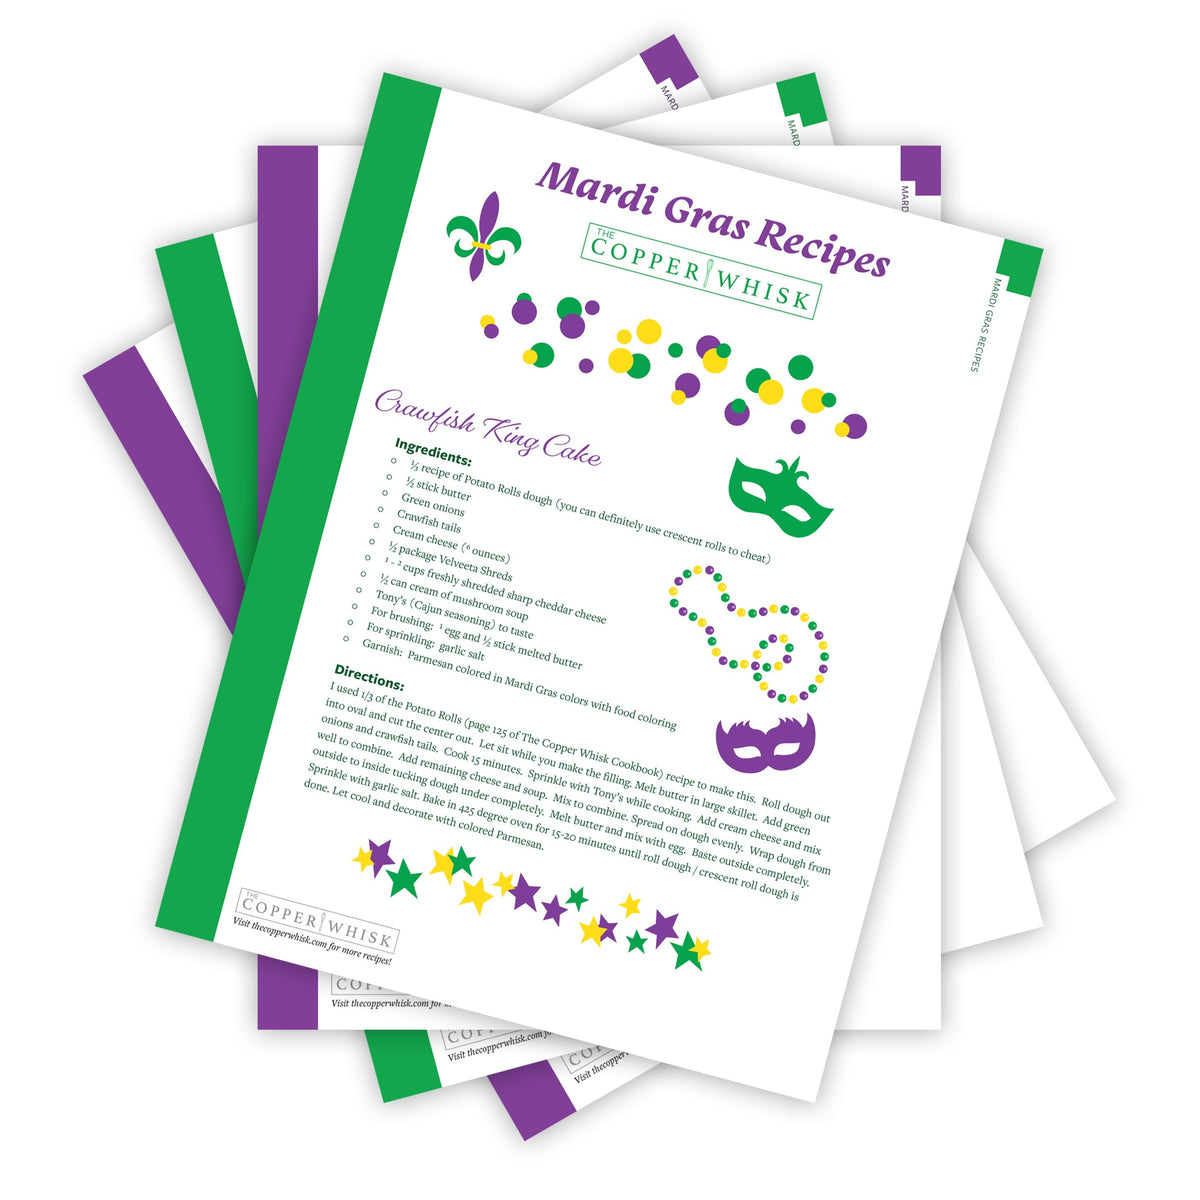 Mardi Gras Recipes: Let the Good Times Roll with The Copper Whisk (Physical Recipe Cards)